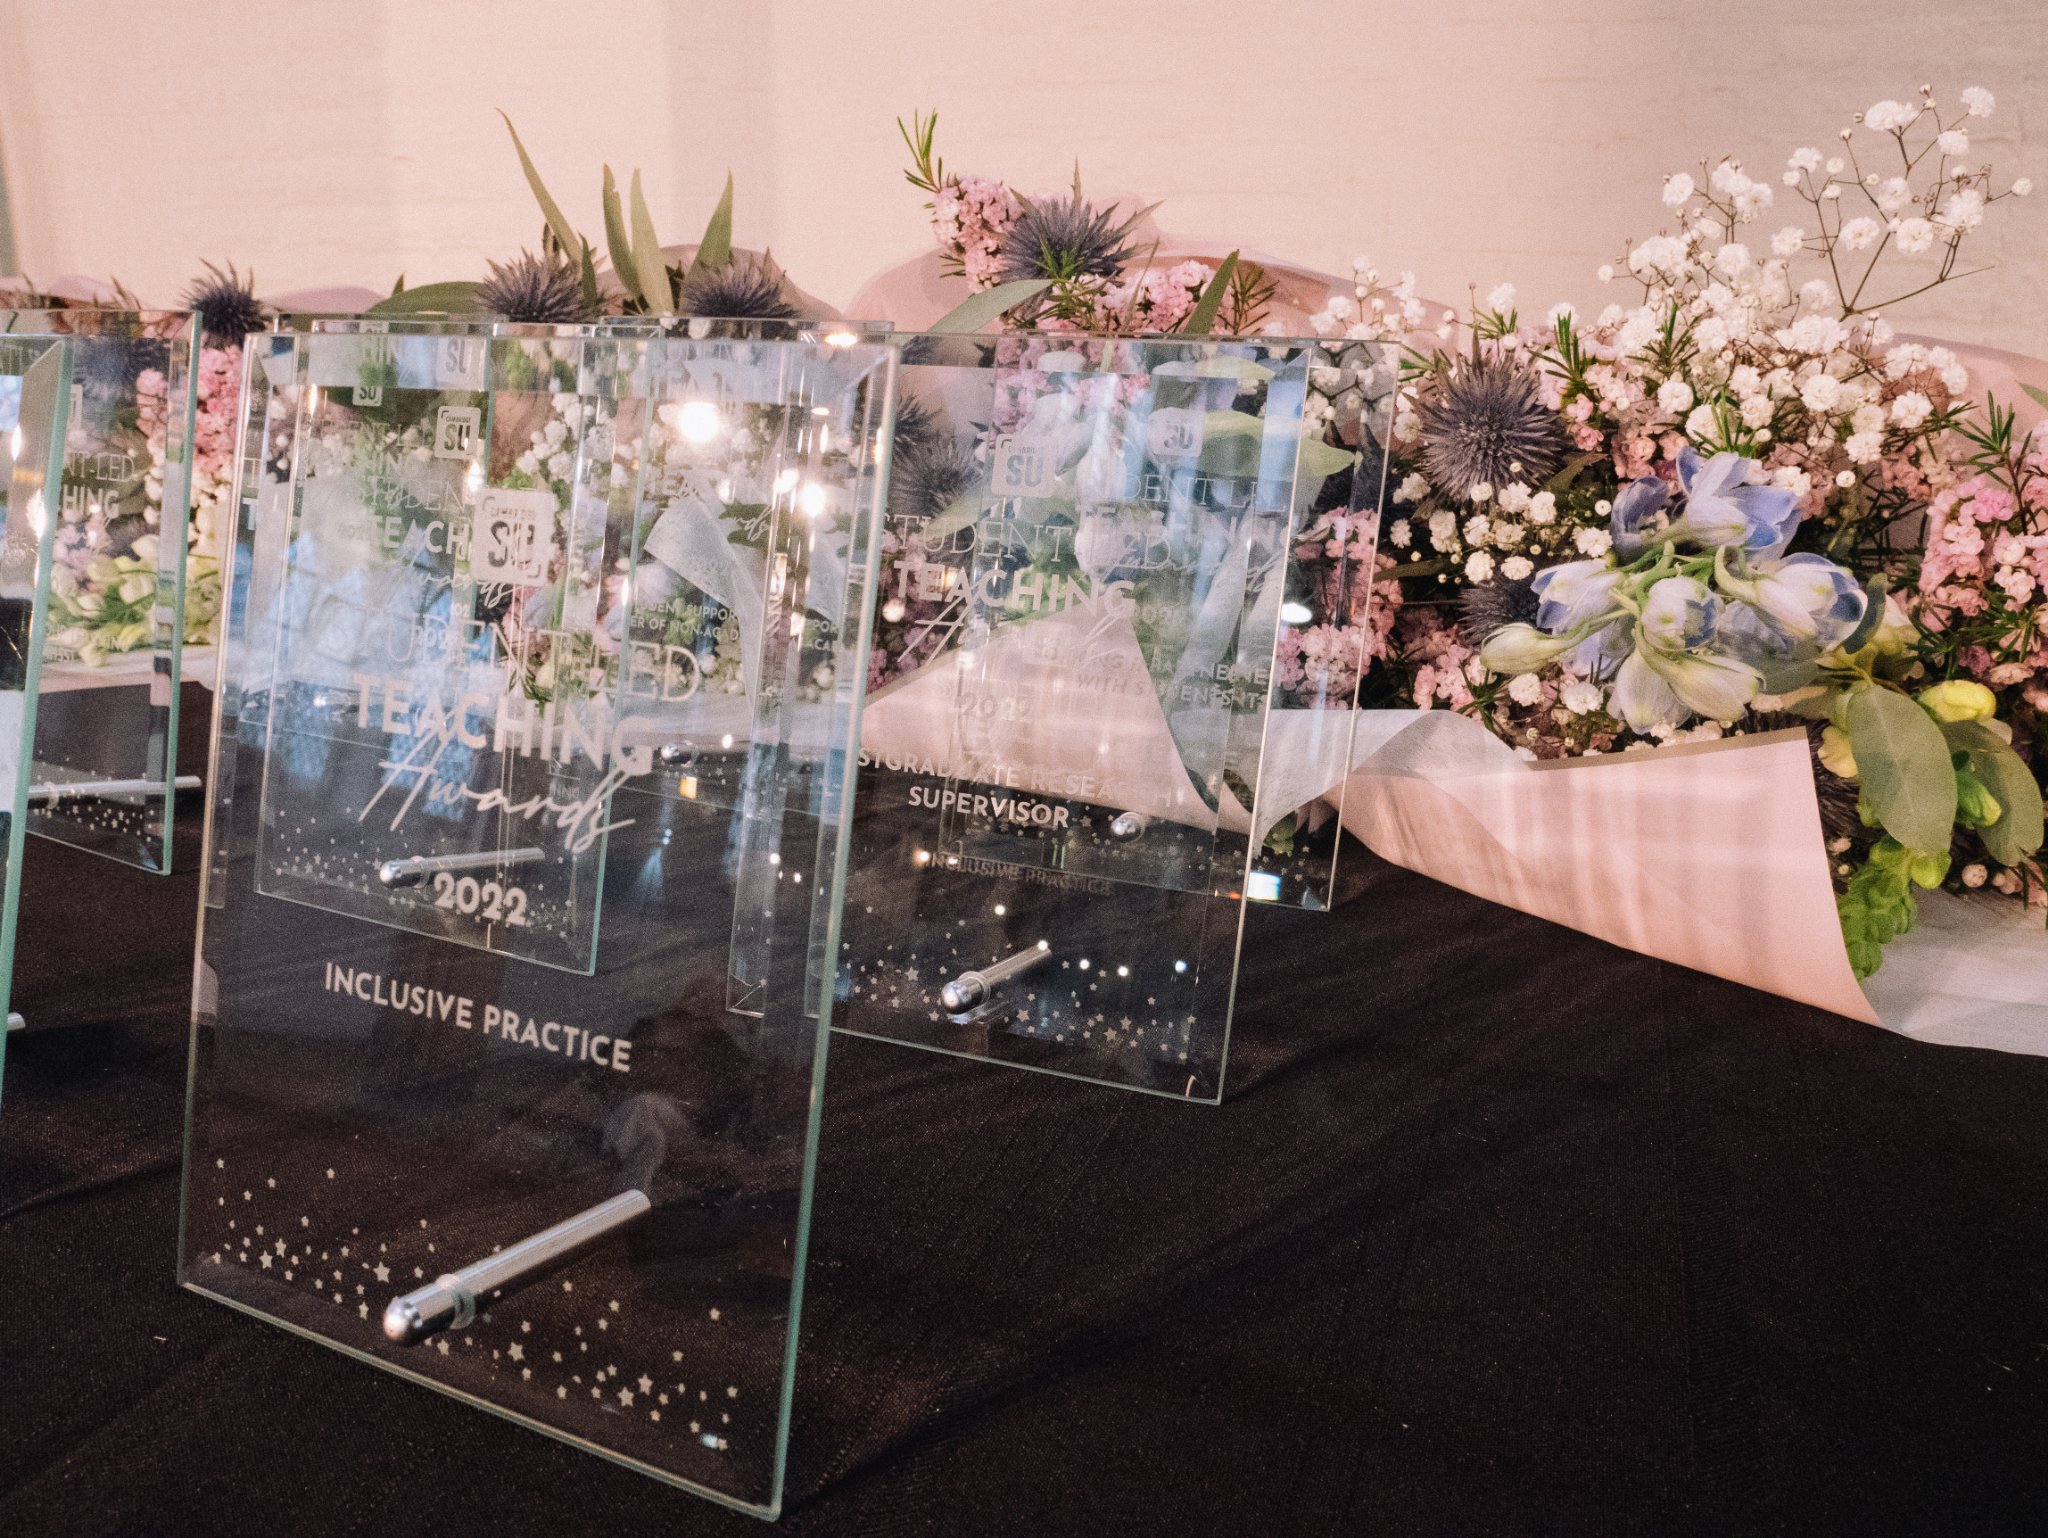 SLTA awards are placed on a table with flowers behind them for award winners